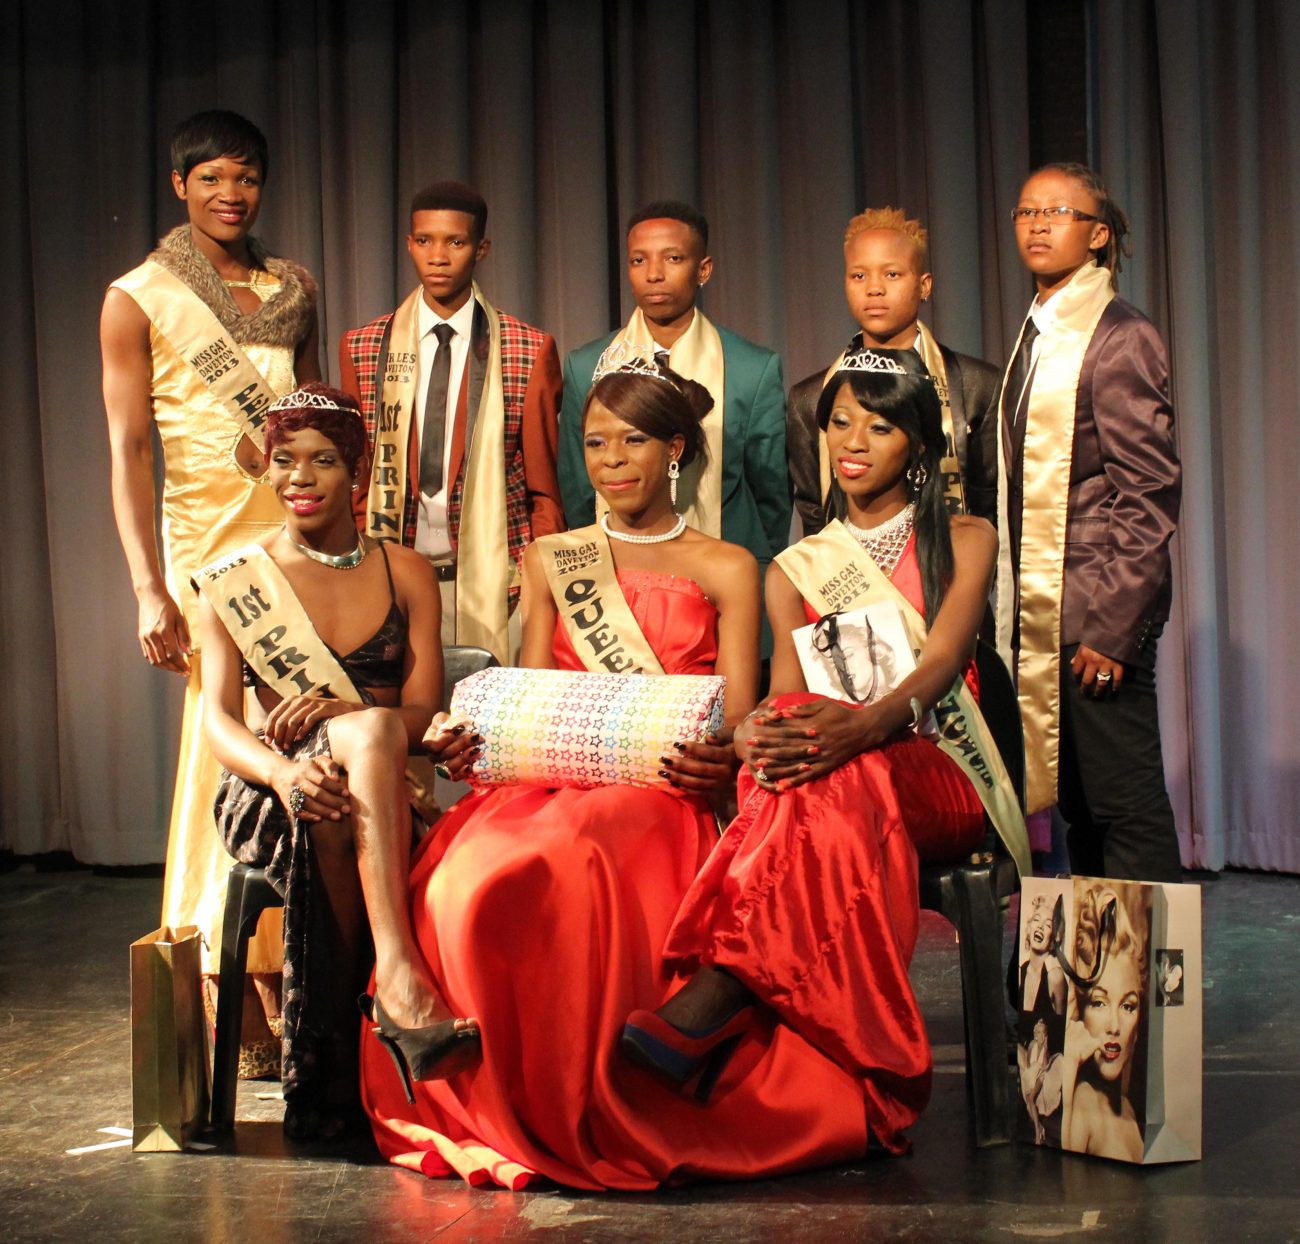 Image of African people in professional attire with sashes.